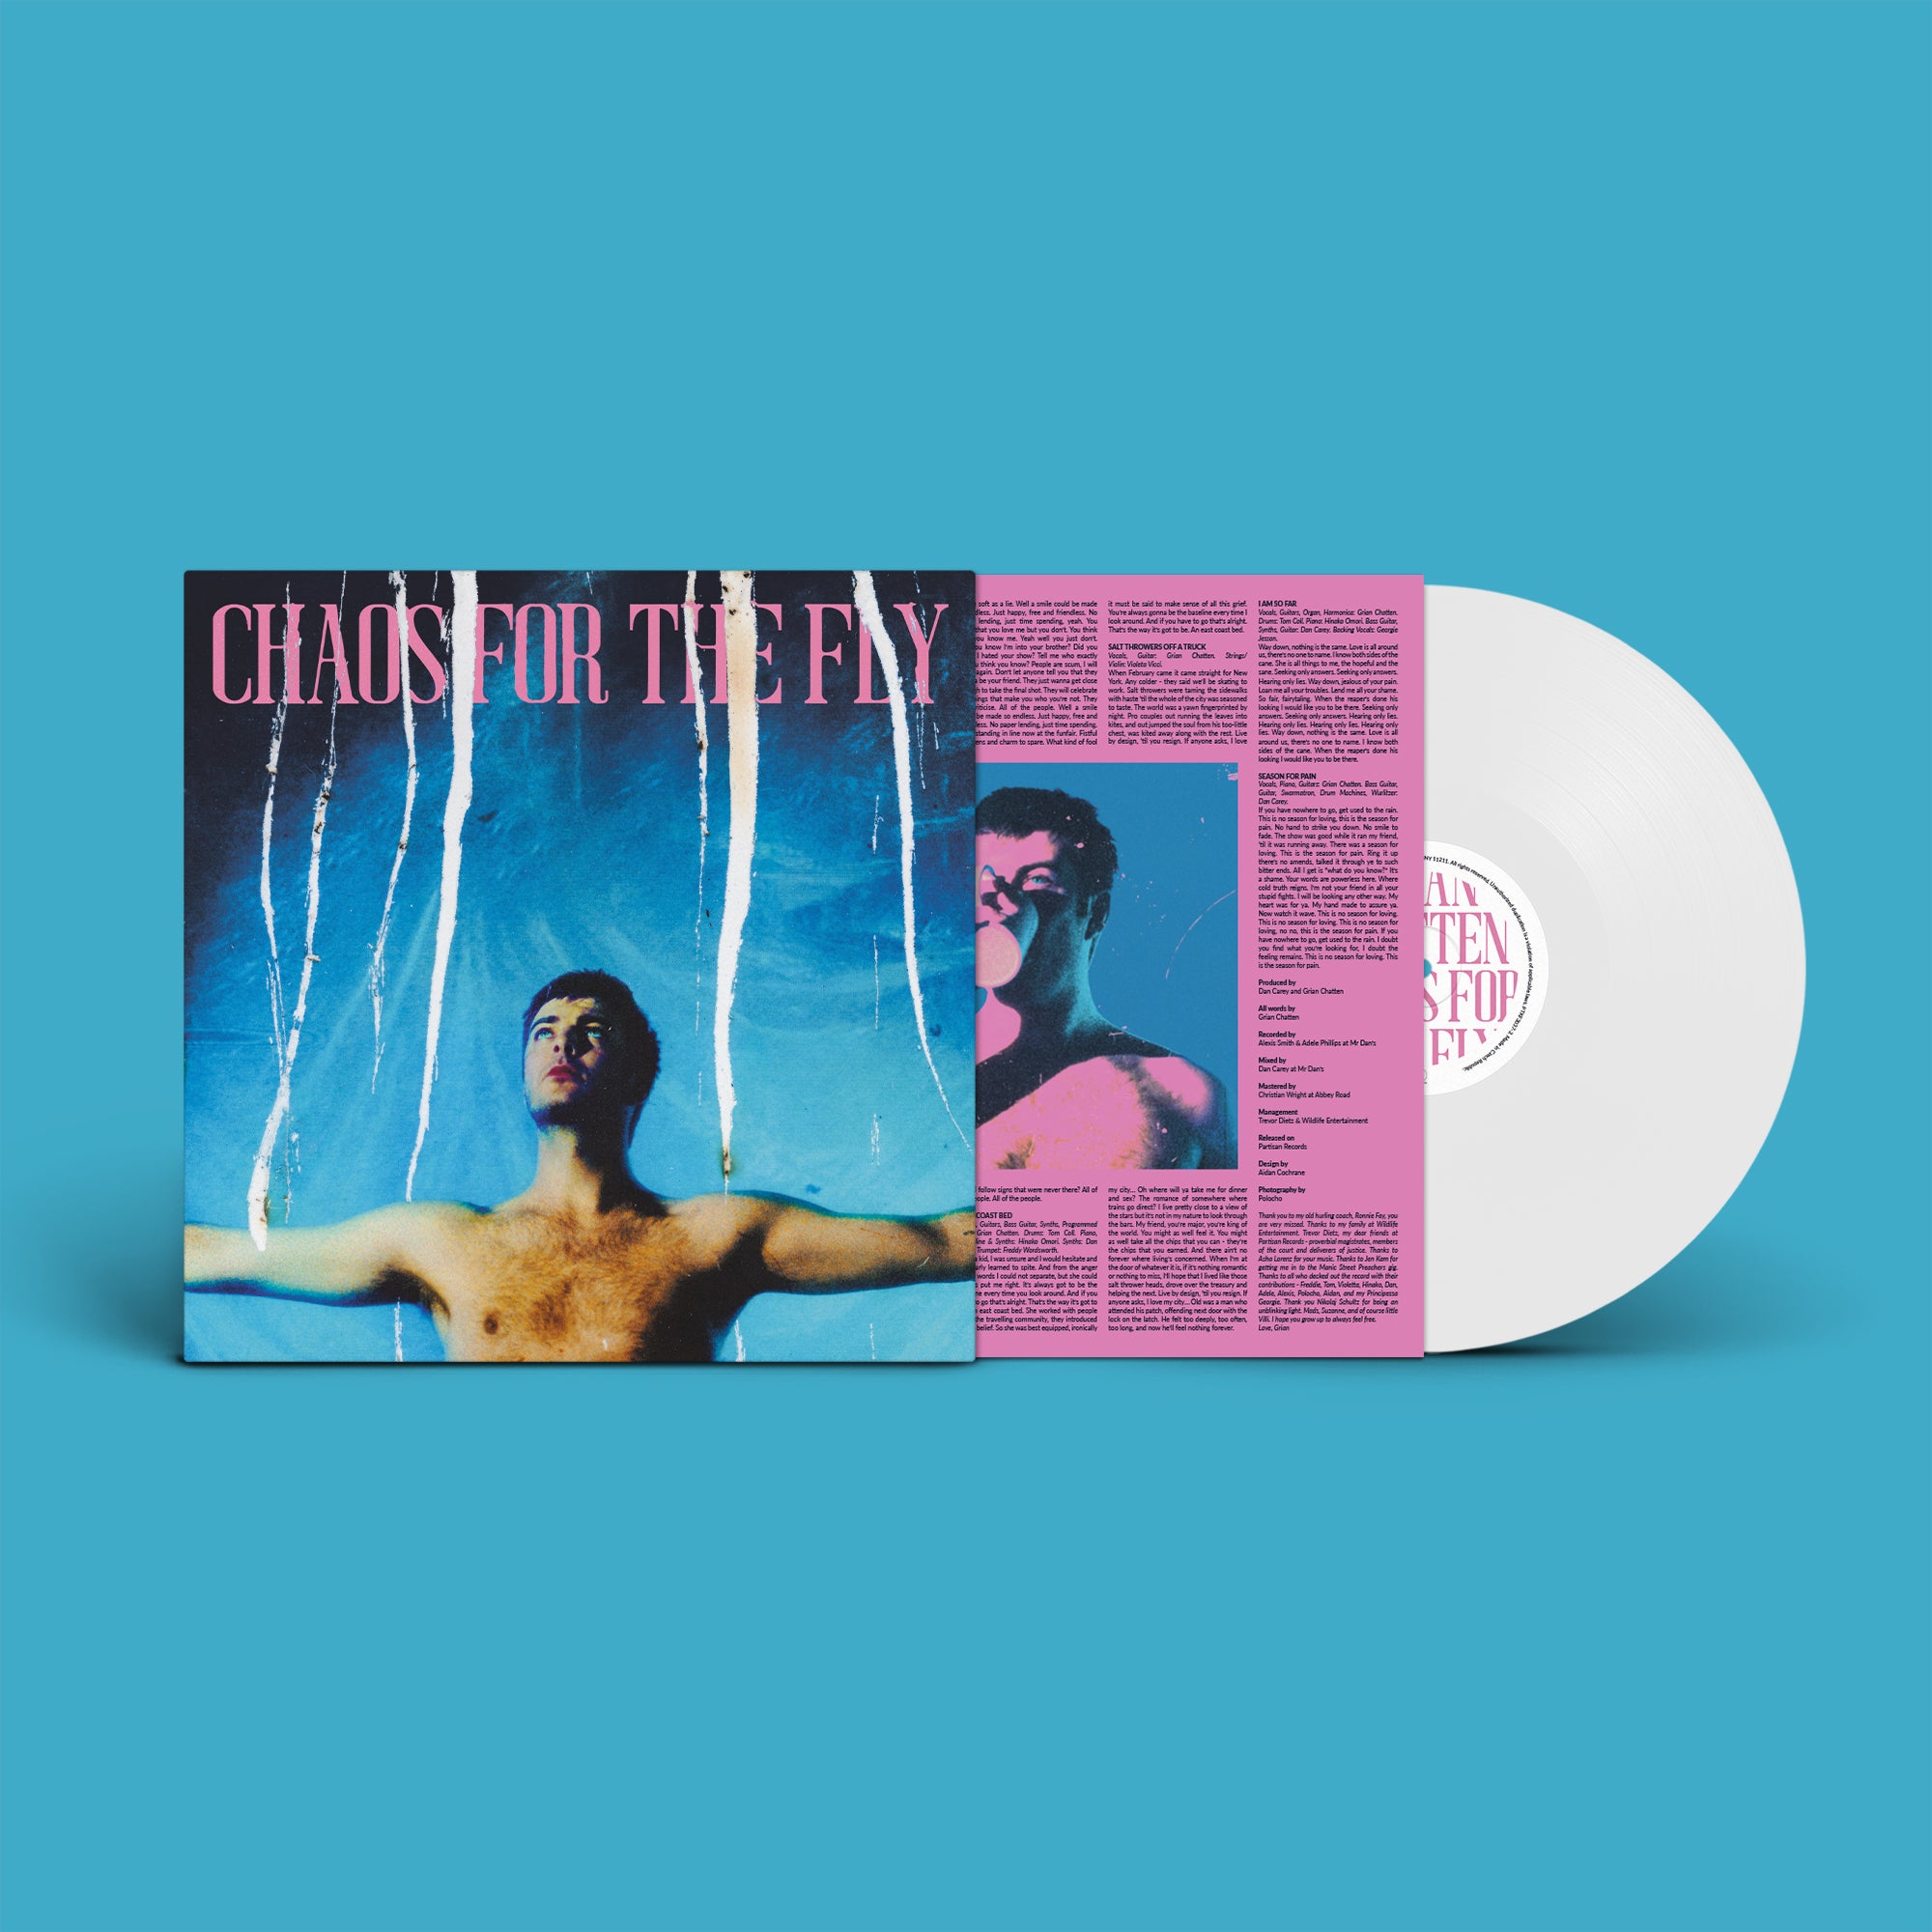 Chaos For The Fly: Limited White Vinyl LP